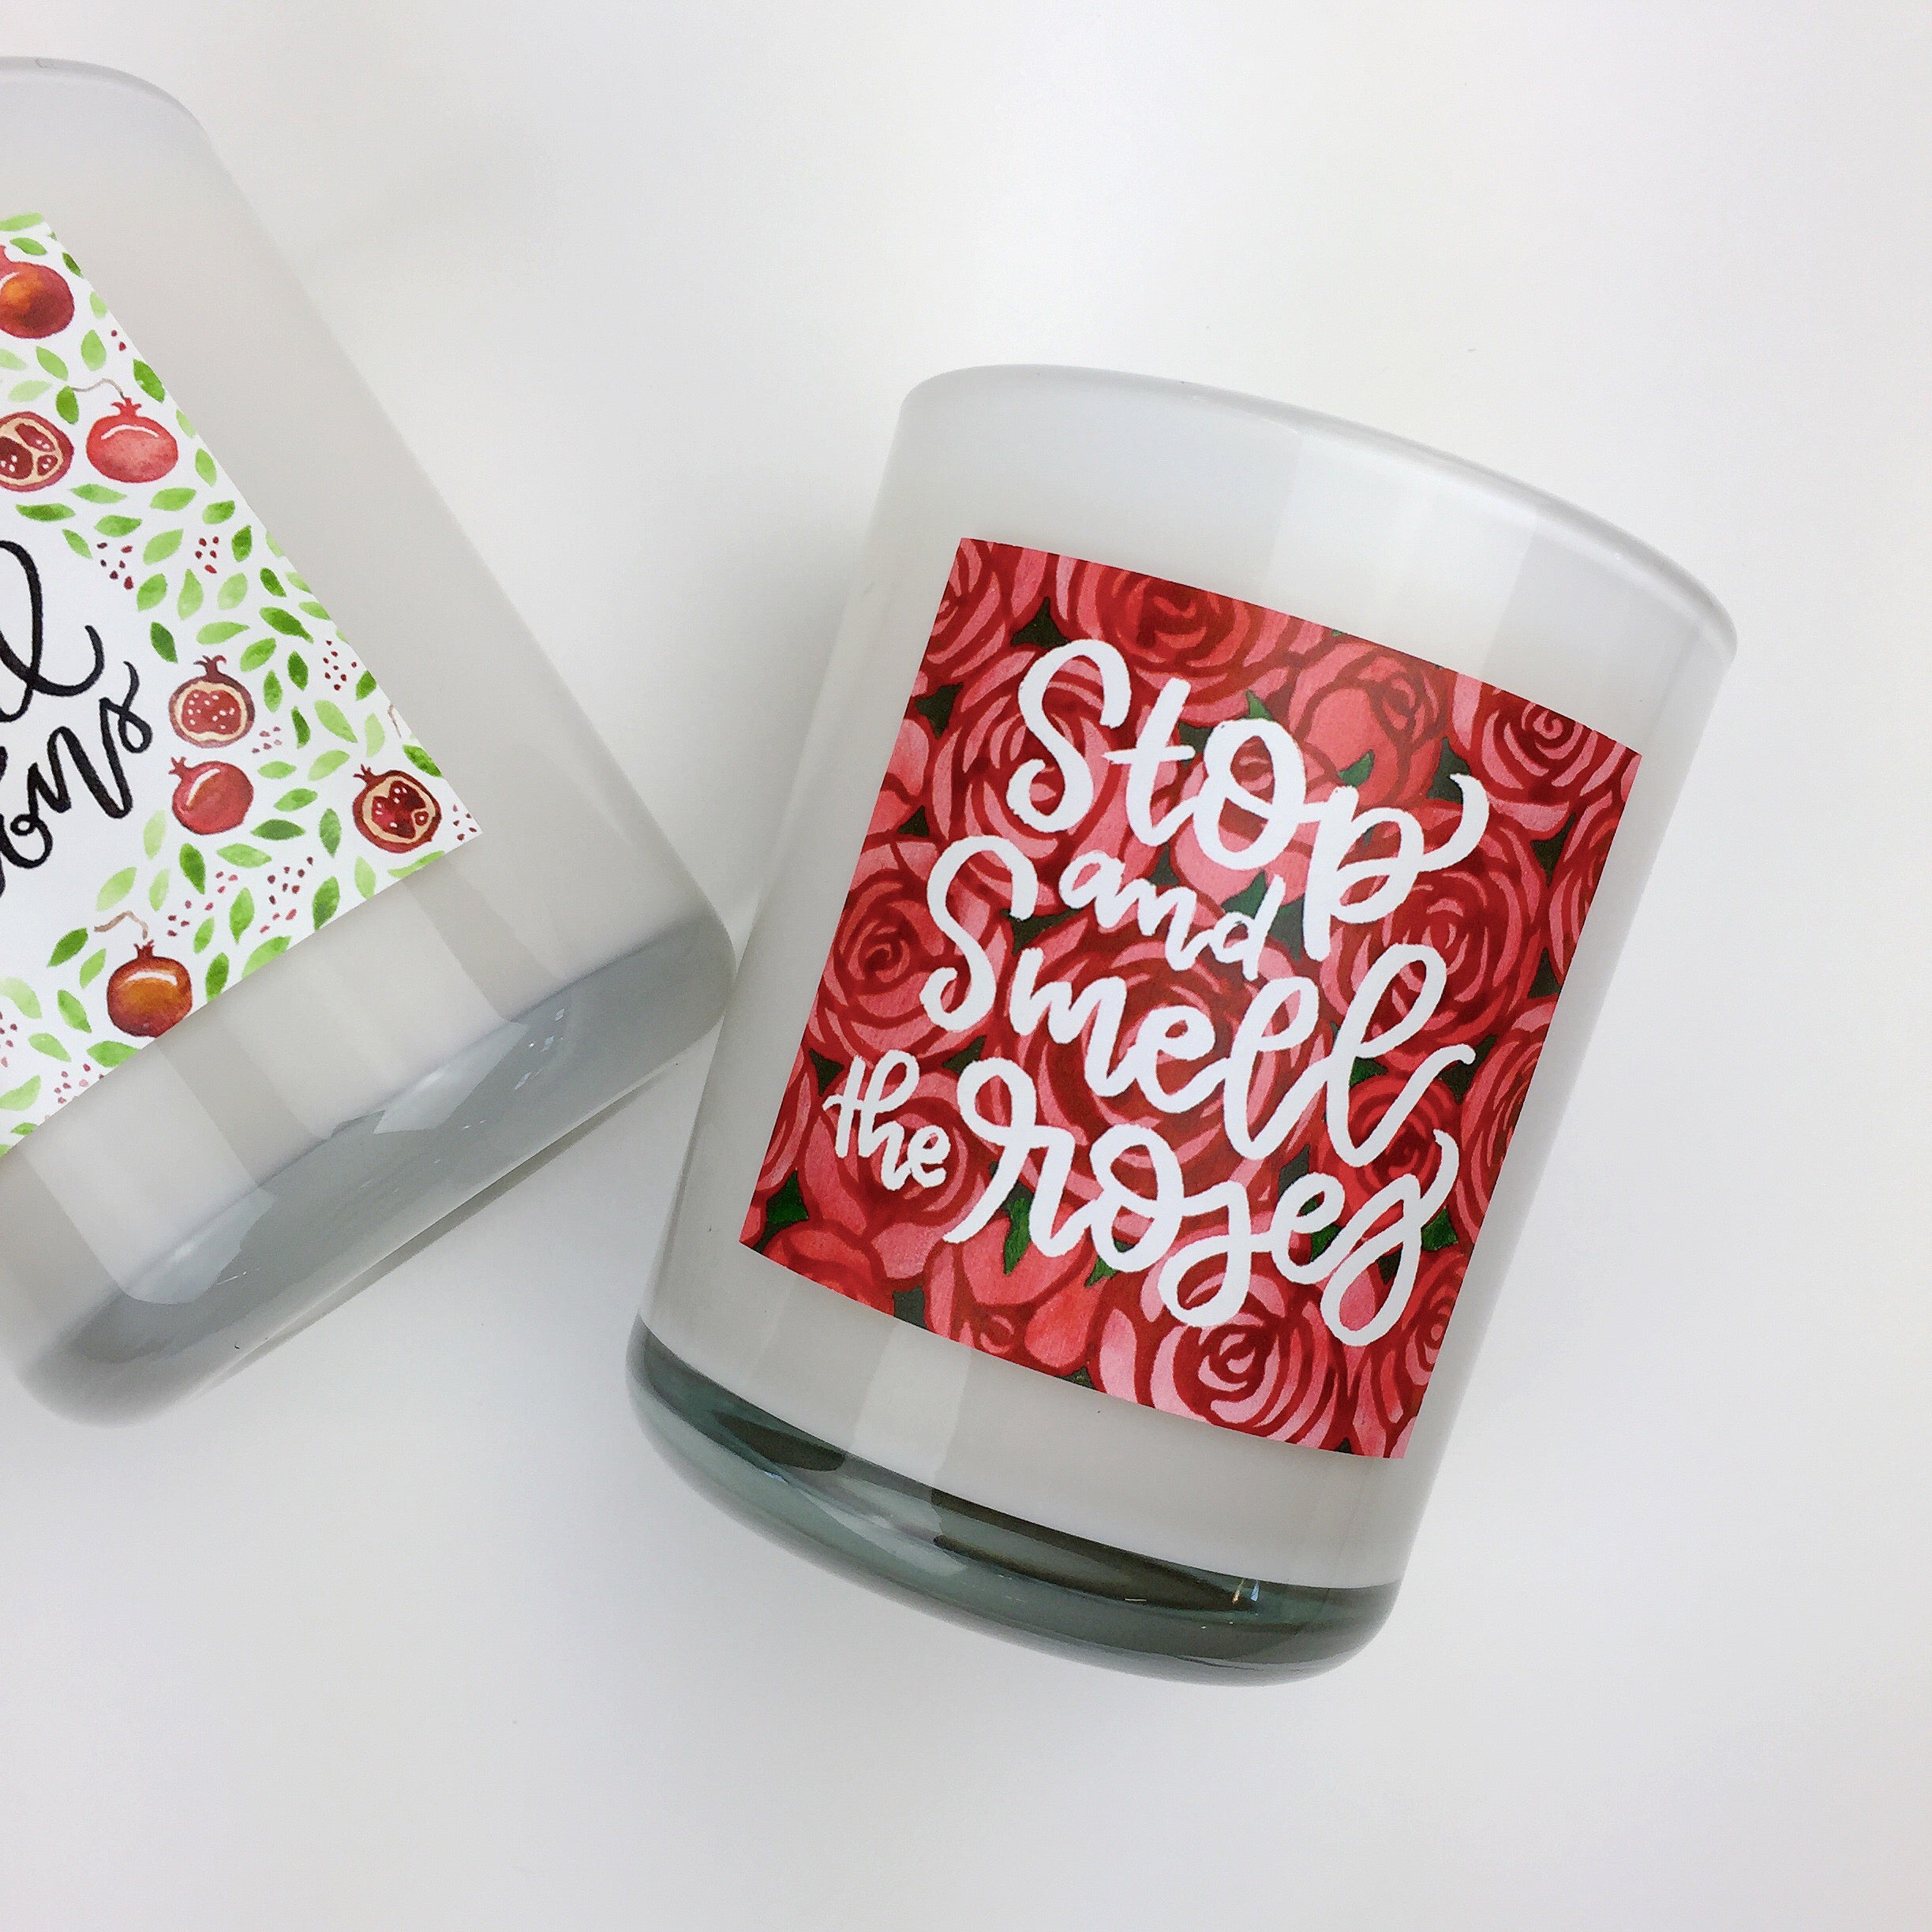 STOP AND SMELL THE ROSES. Fresh Cut Roses Coconut Soy Blend Candle.